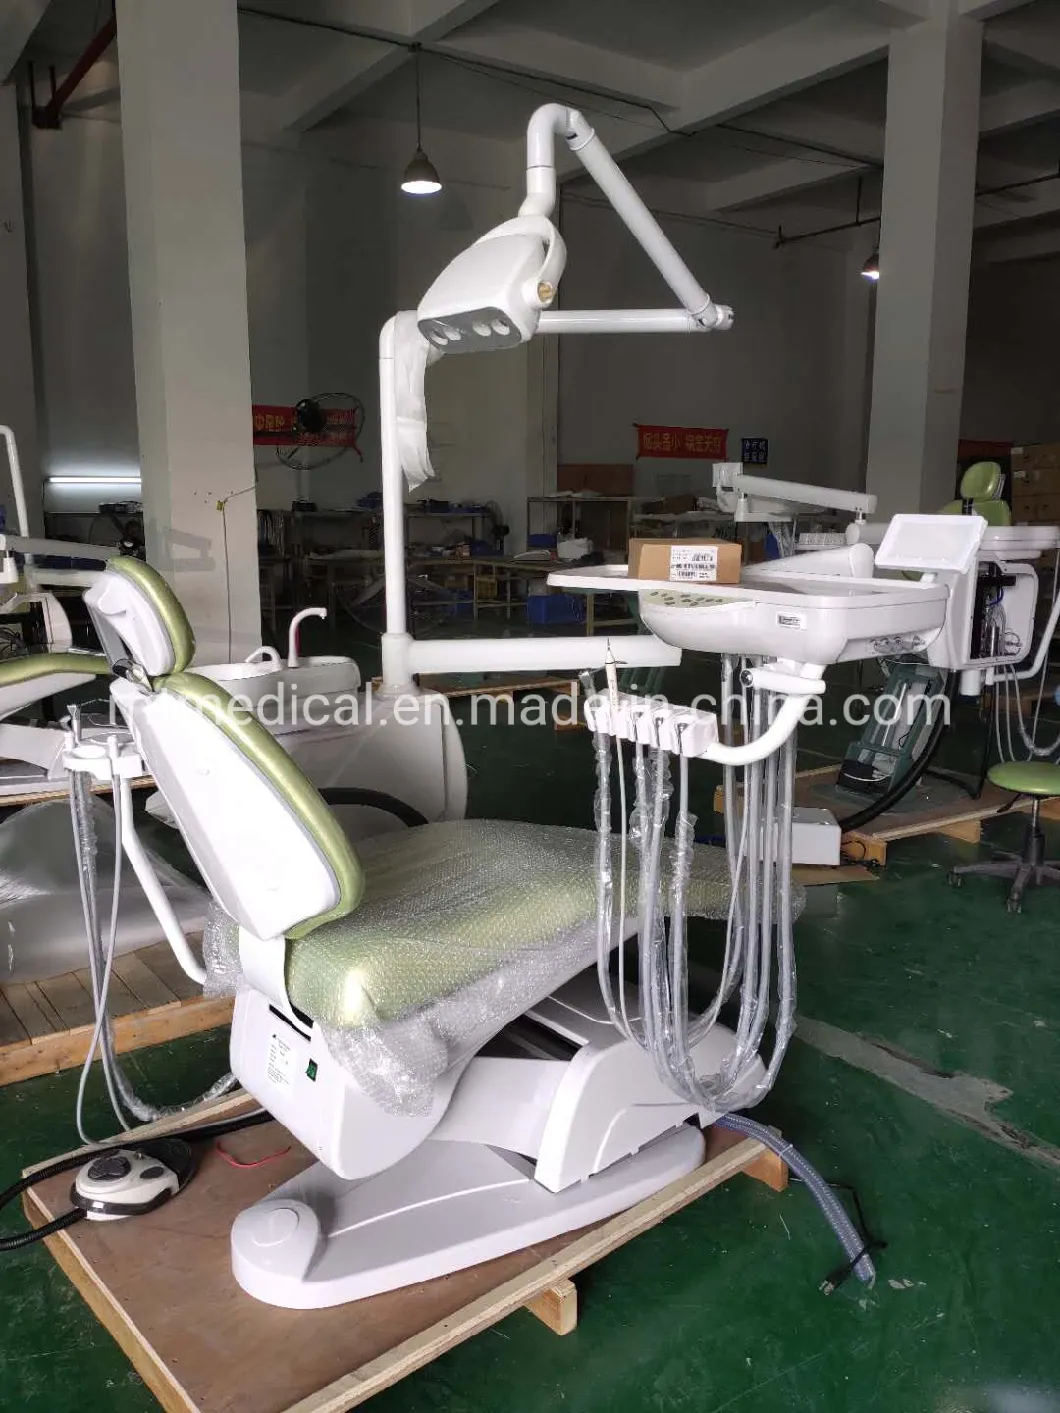 China Direct Adjustable Portable Internal Best Dental Chairs